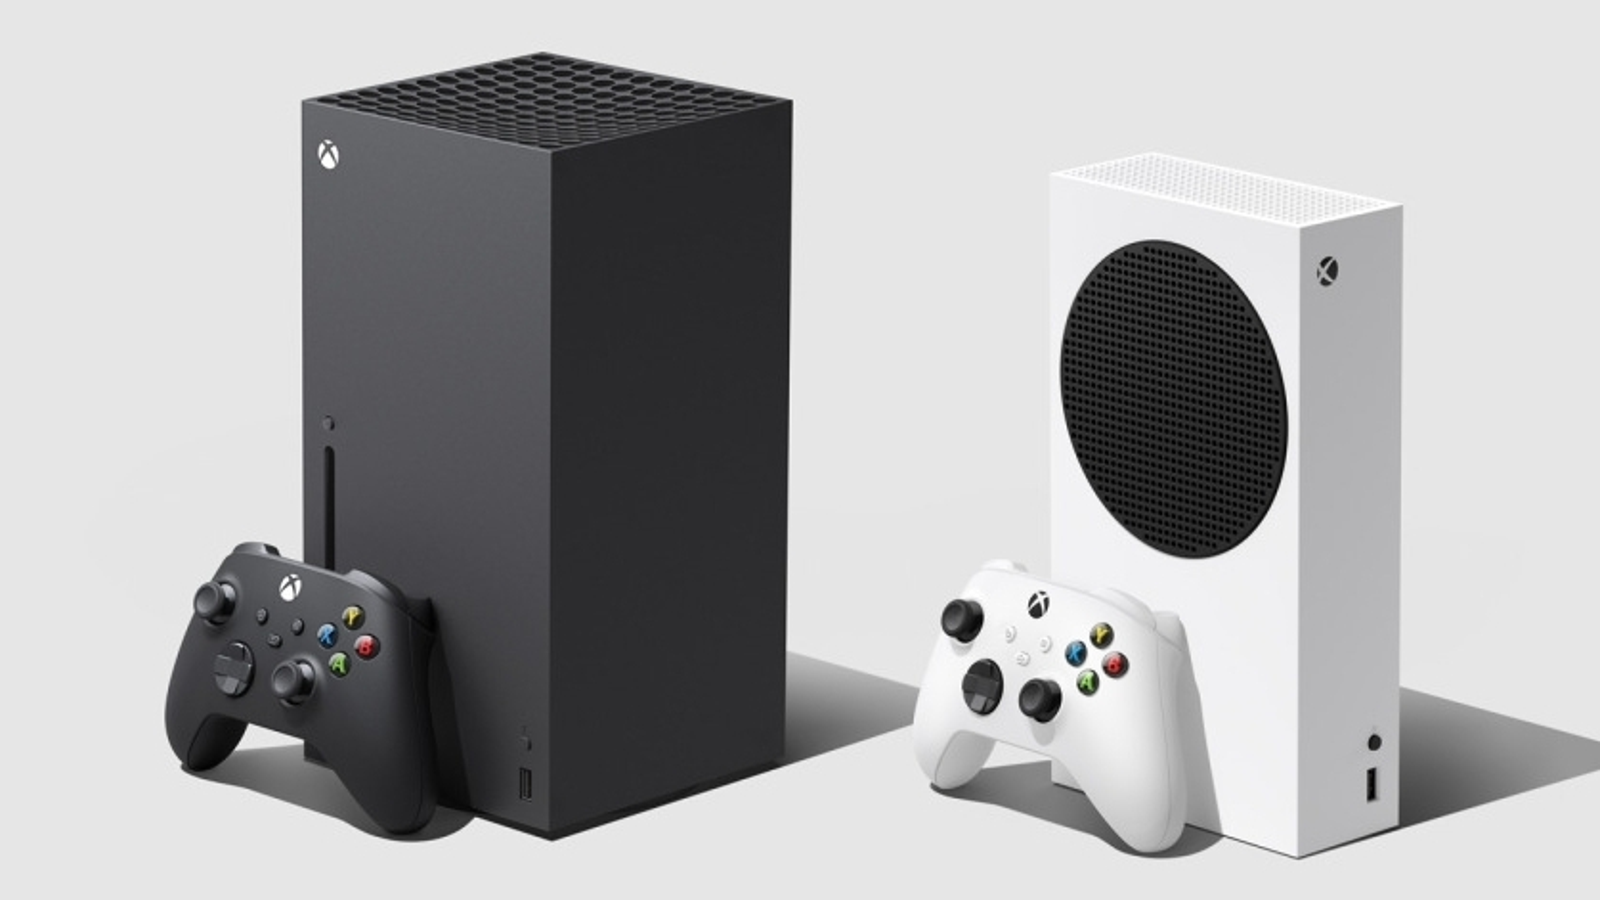 Microsoft owns up to how badly the Xbox One lost to the PS4 - Protocol